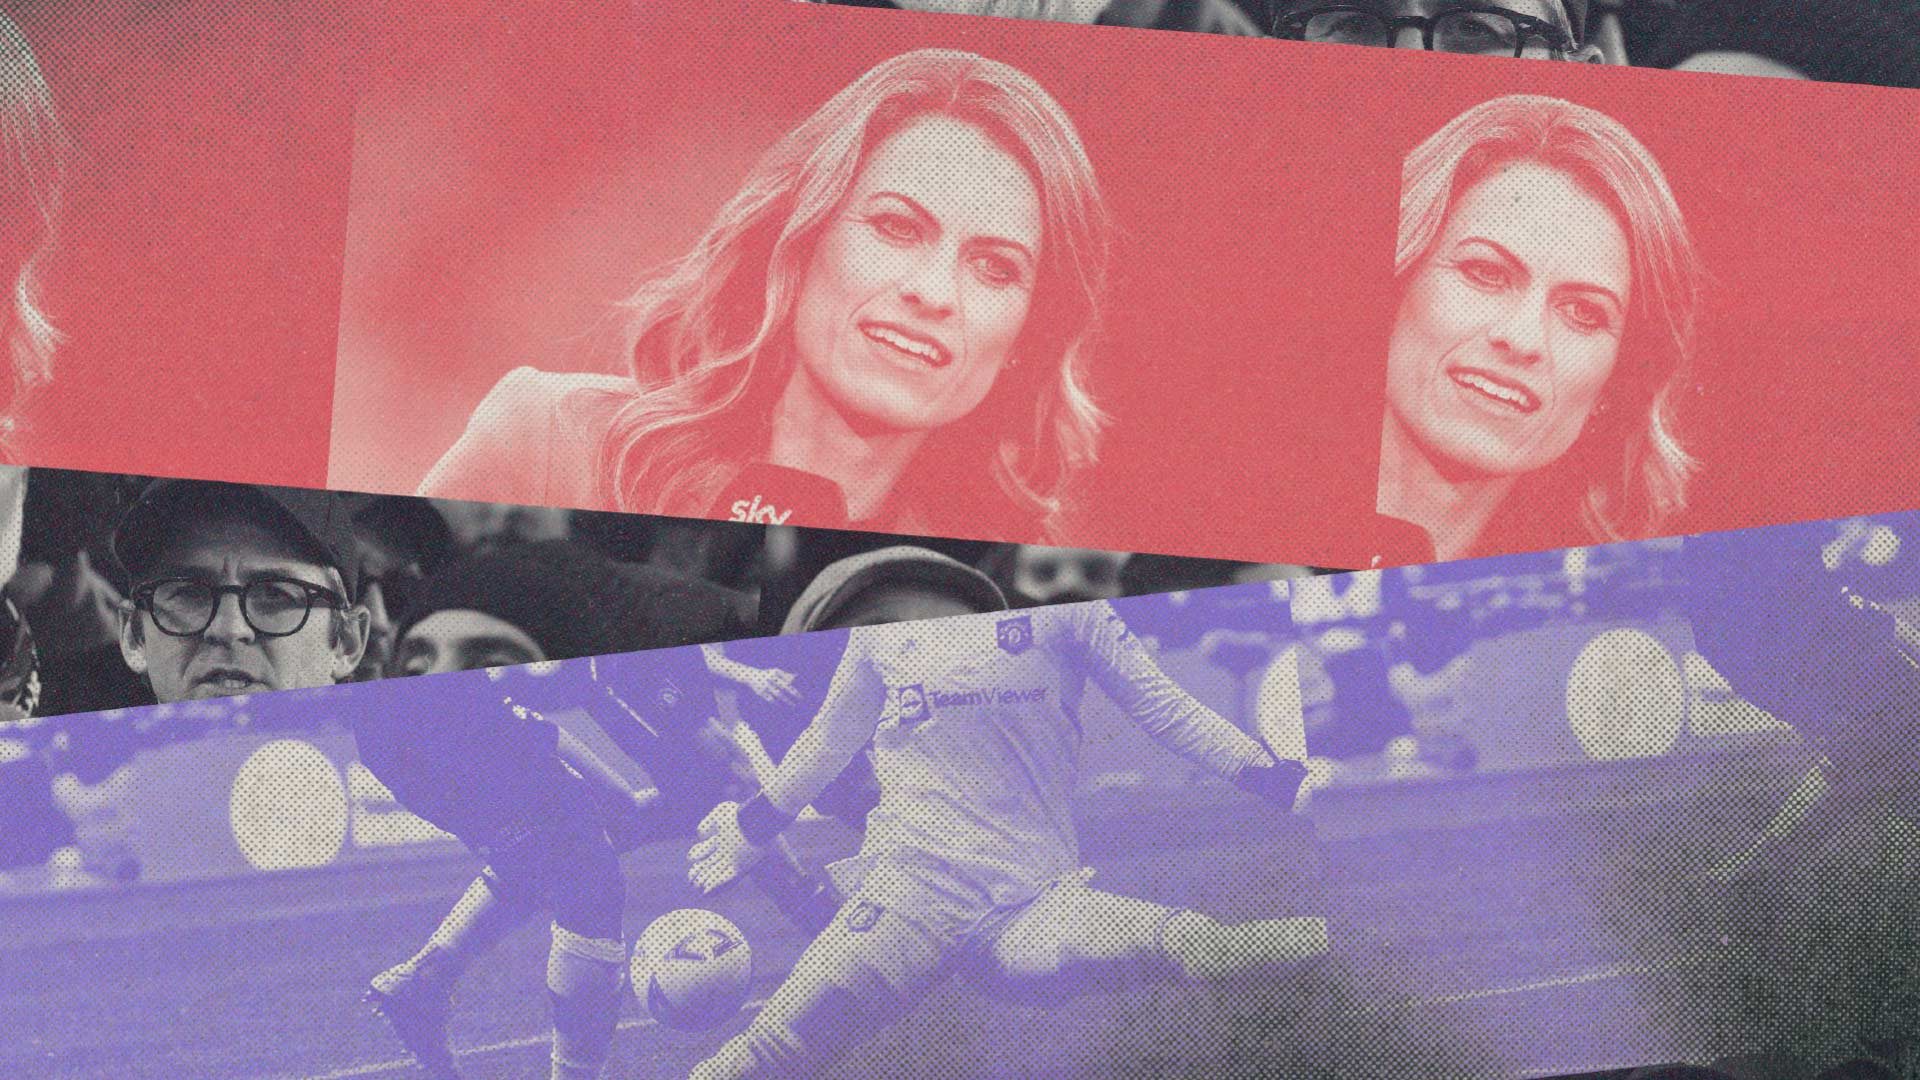 A collage of Karen Carney (awful pundit), Joey Barton (awful human being), and Mary Earps (awful football club, but we'll let her off 'cos she's ace)